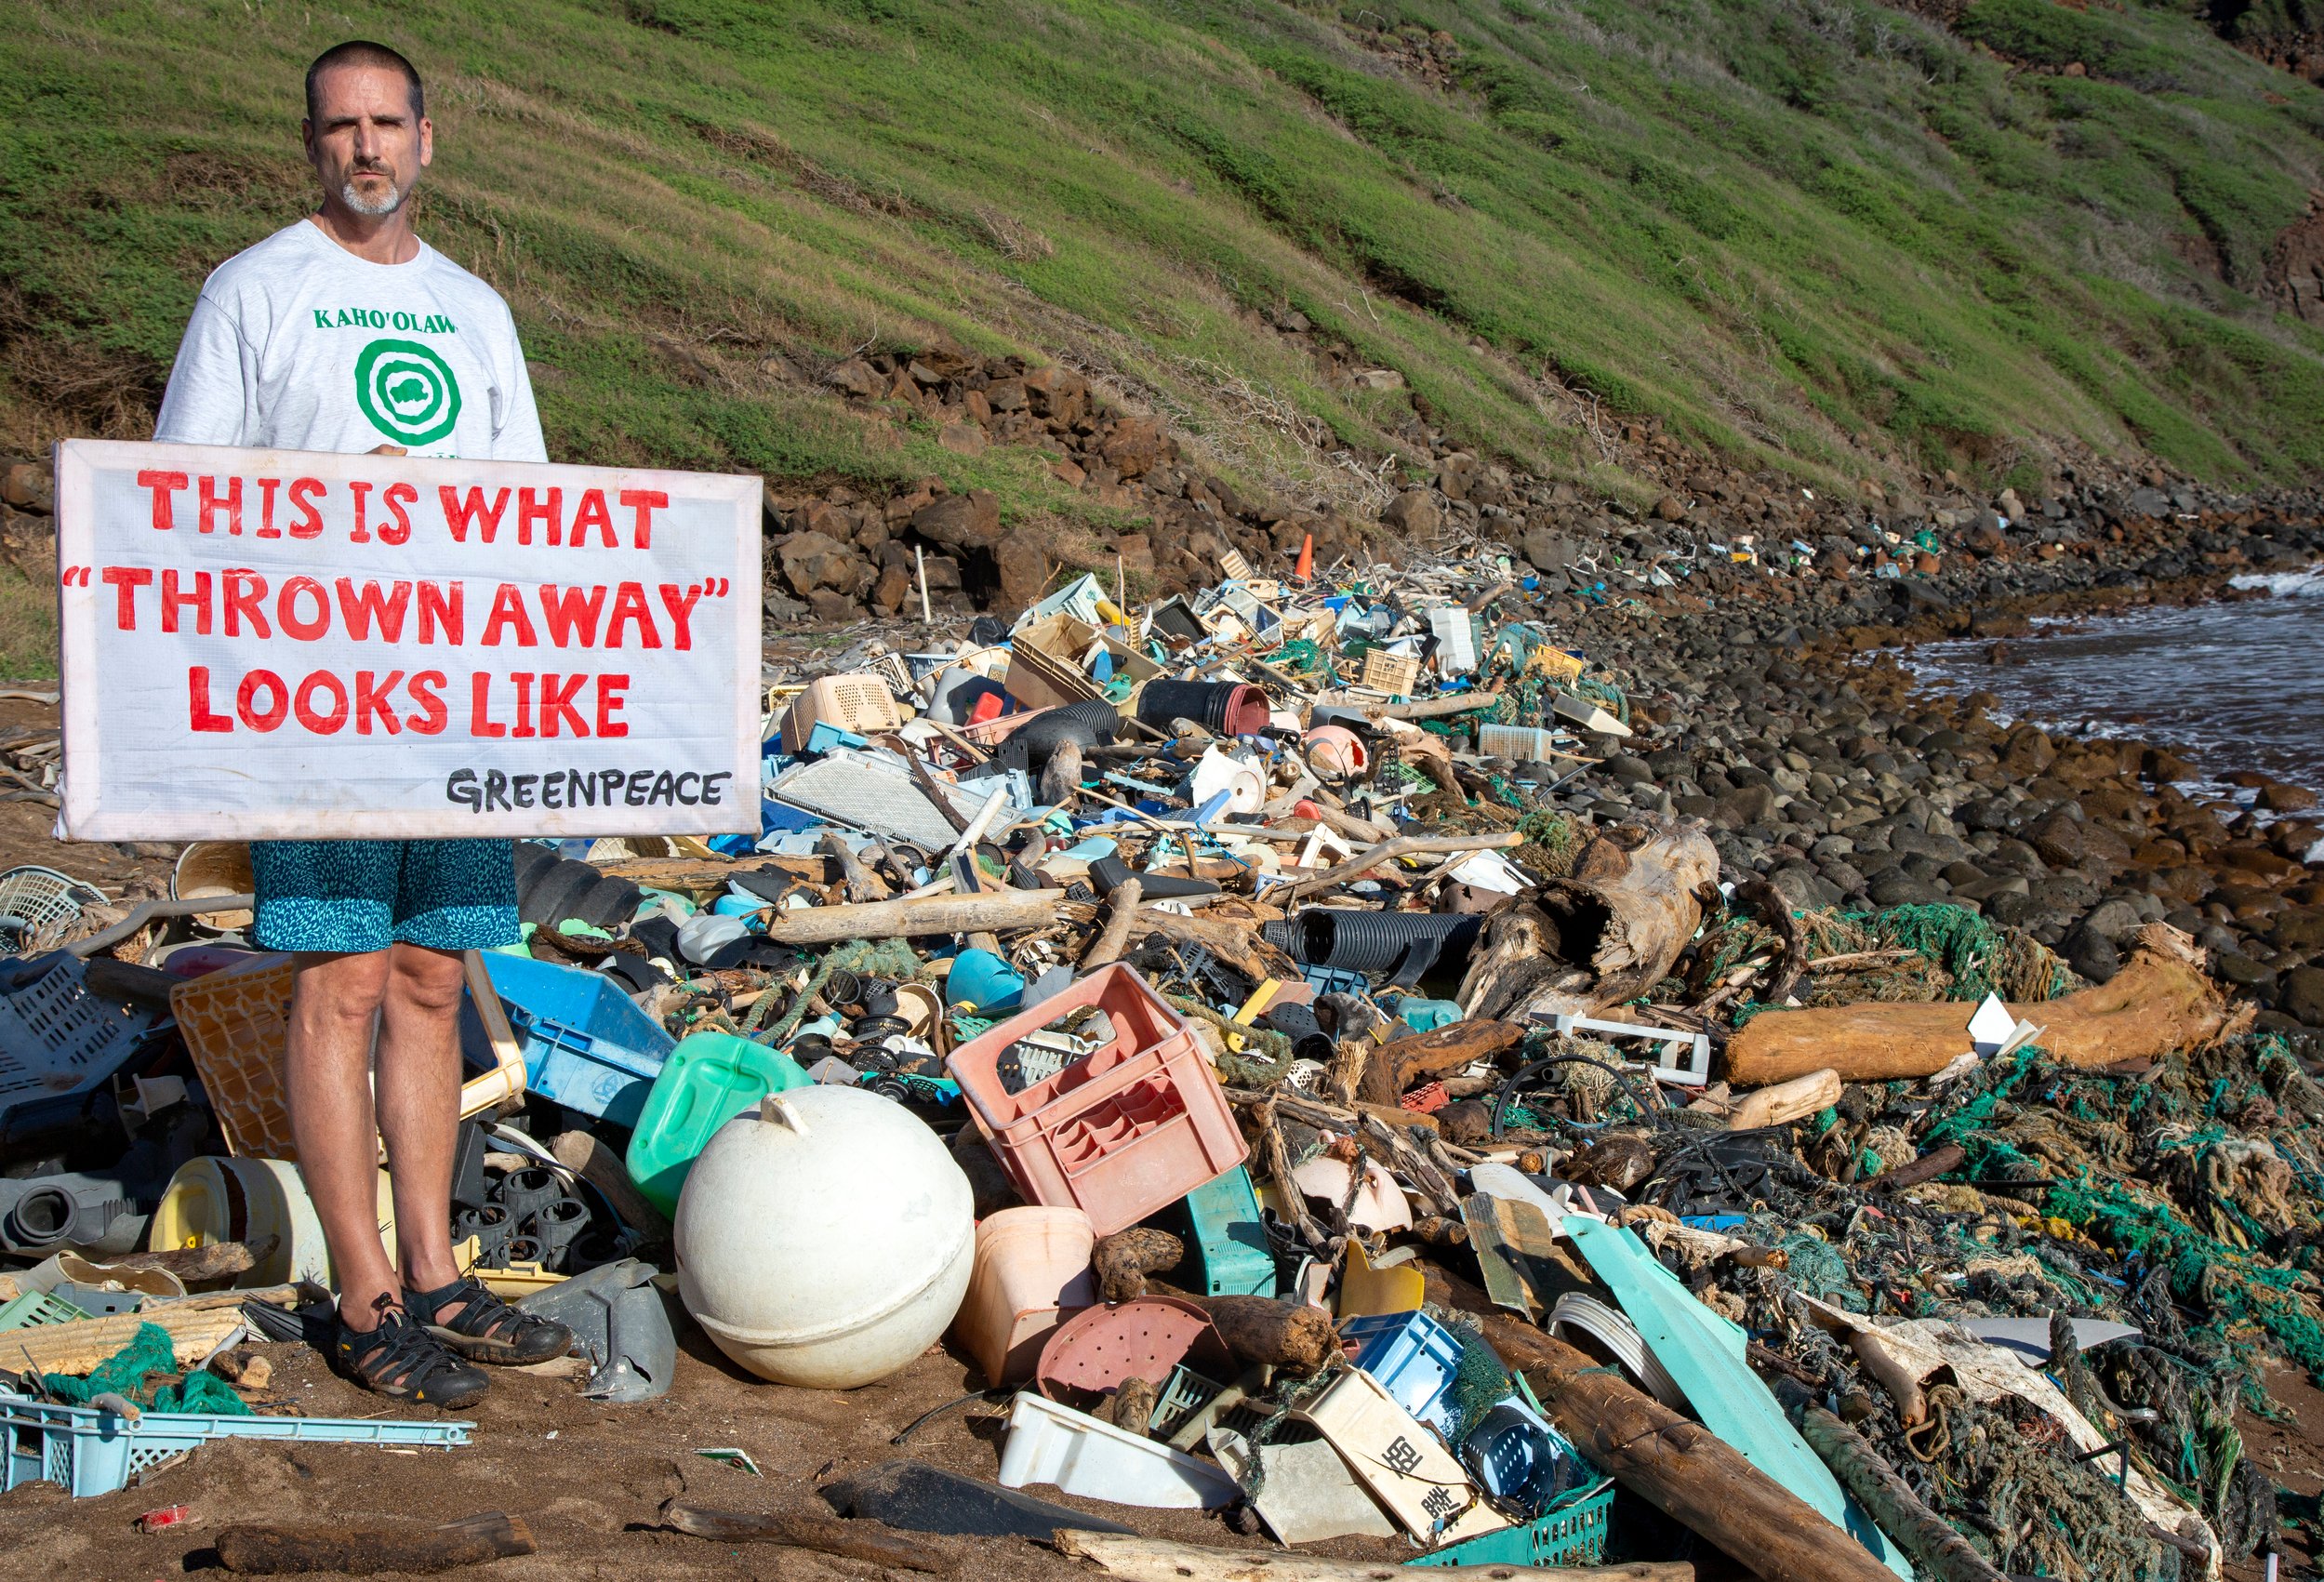 This is Where Plastic Goes When You Throw It 'Away' - Greenpeace USA